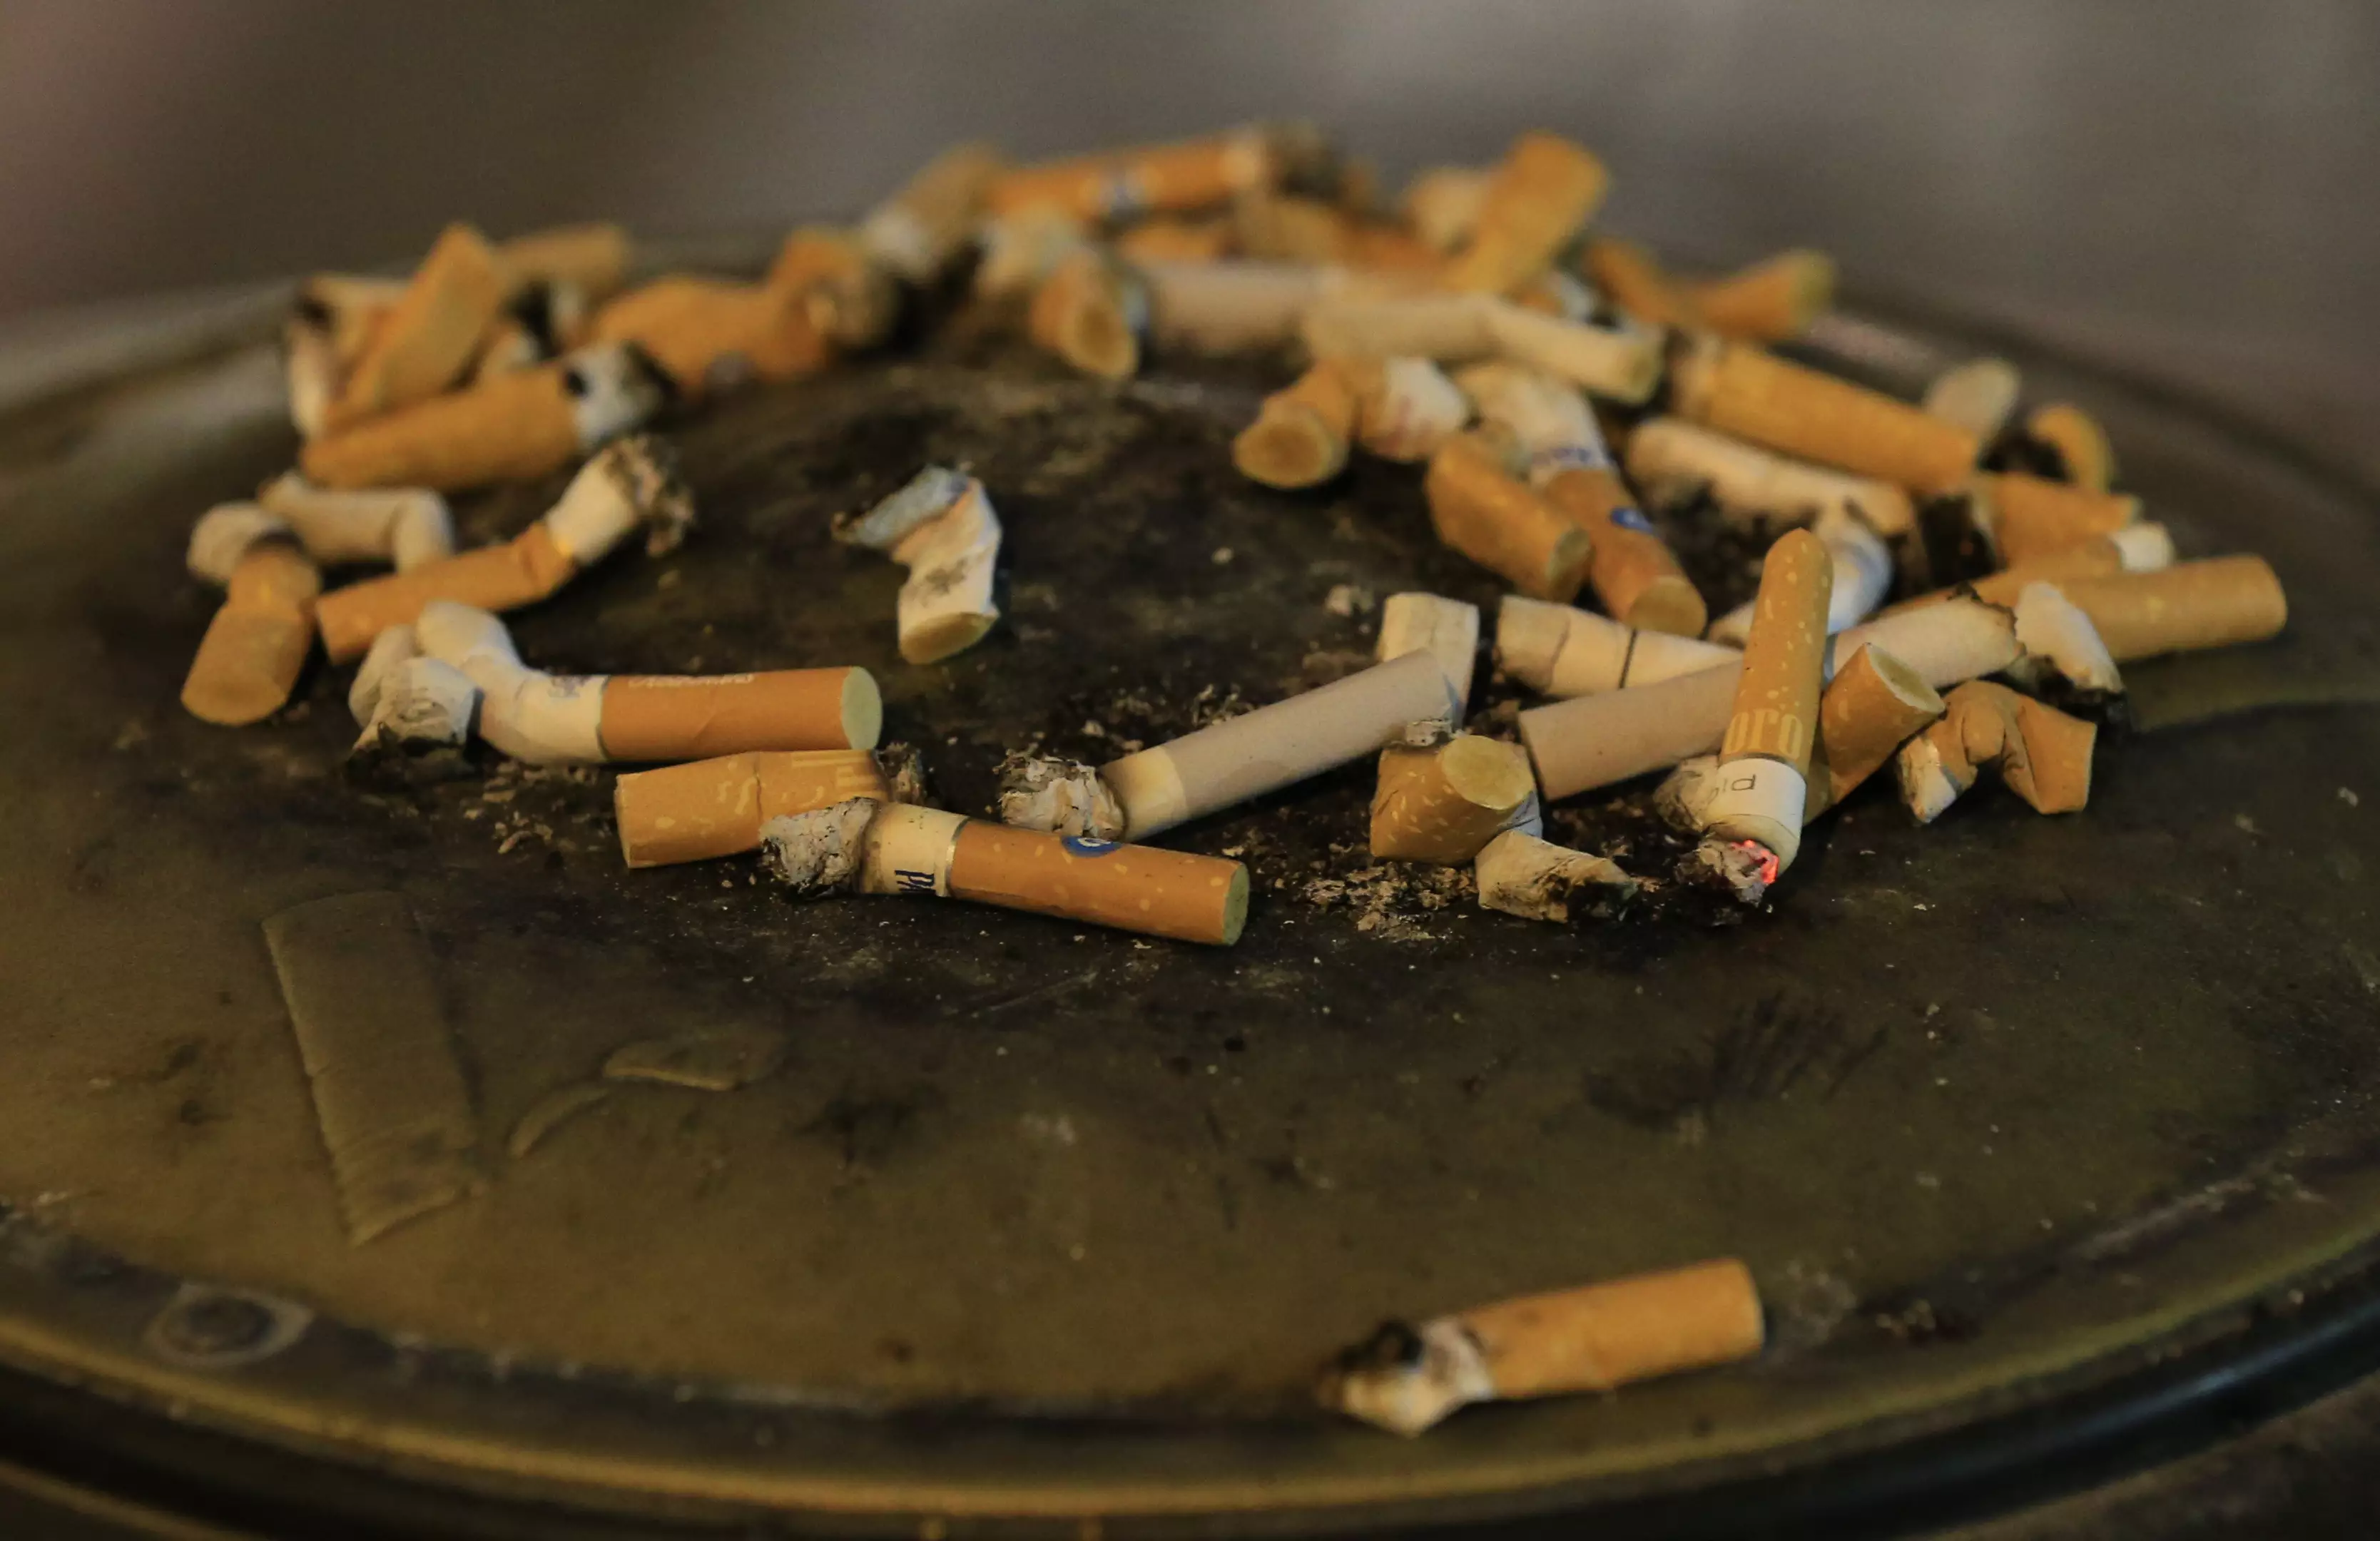 Cigarette butts... I think we'd all rather not.